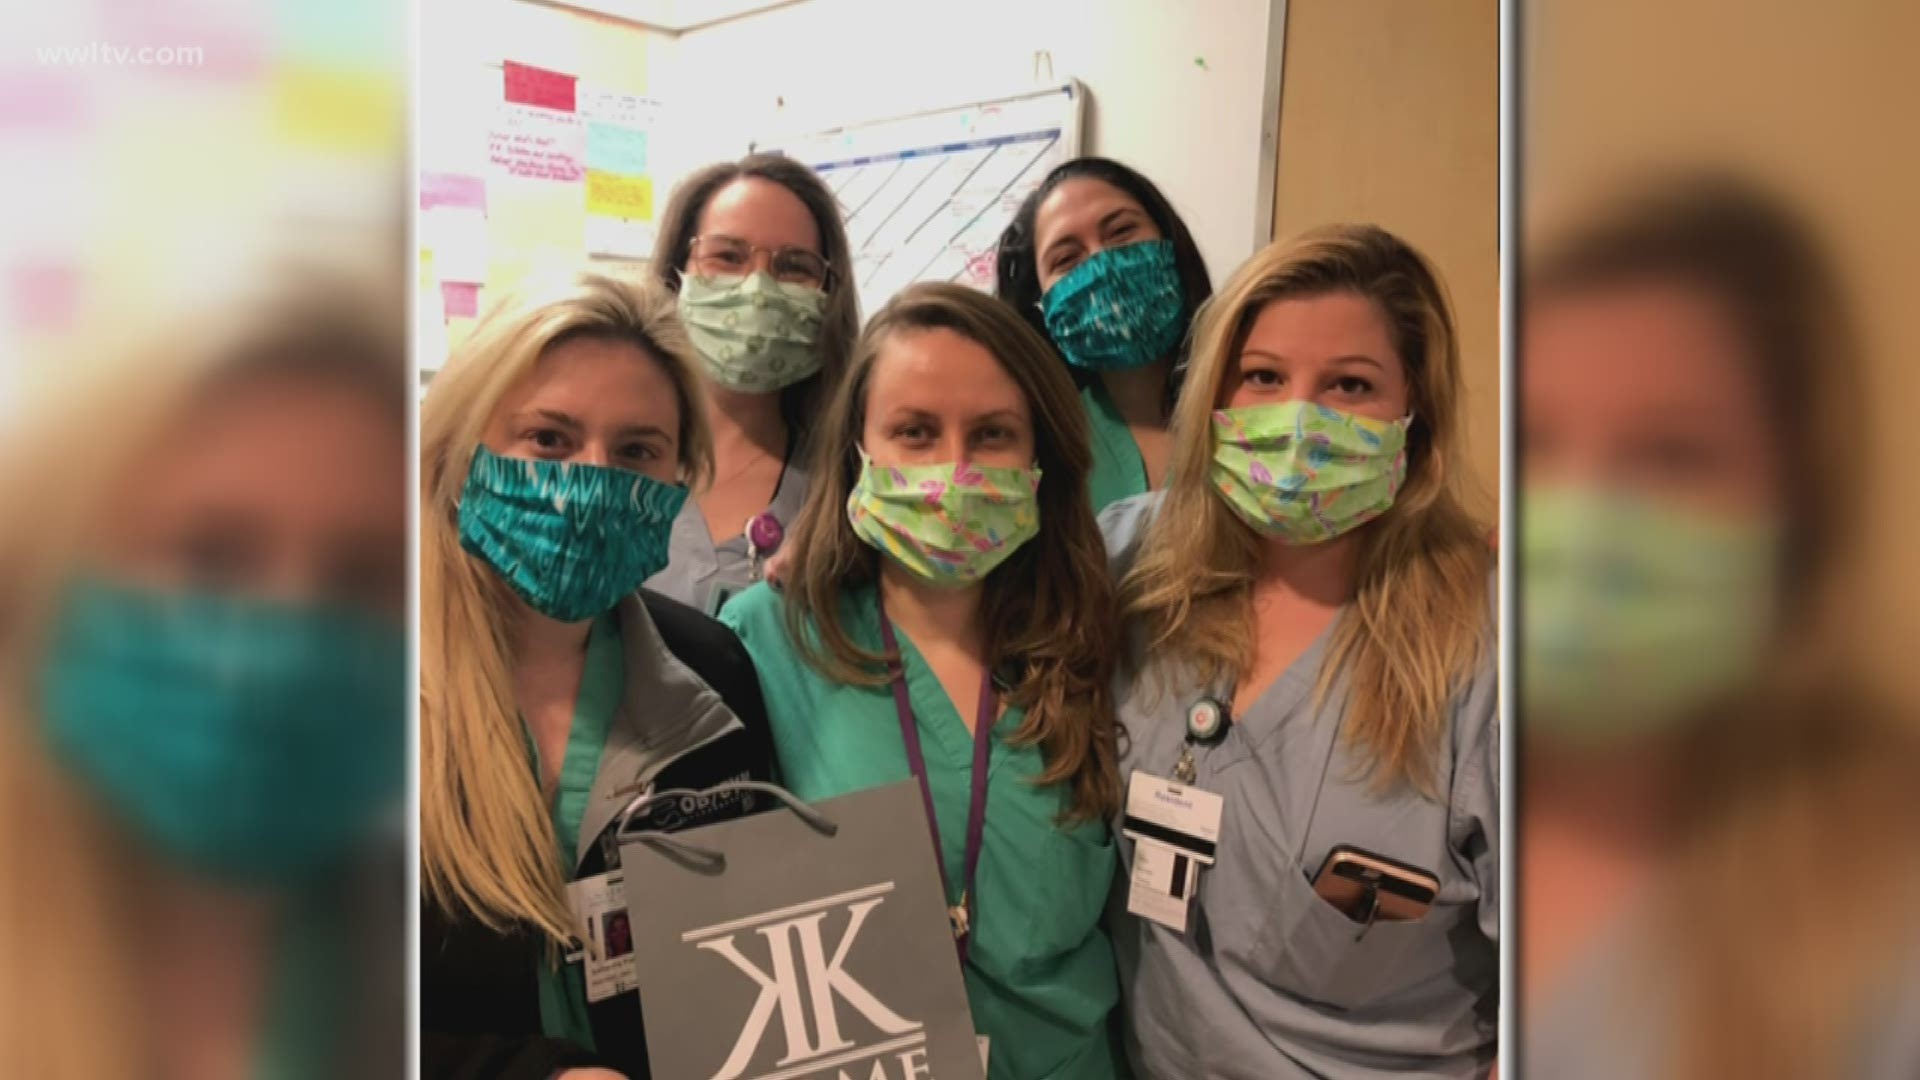 Local designer Katie Koch has designed and donated hundreds of masks for medical personnel.